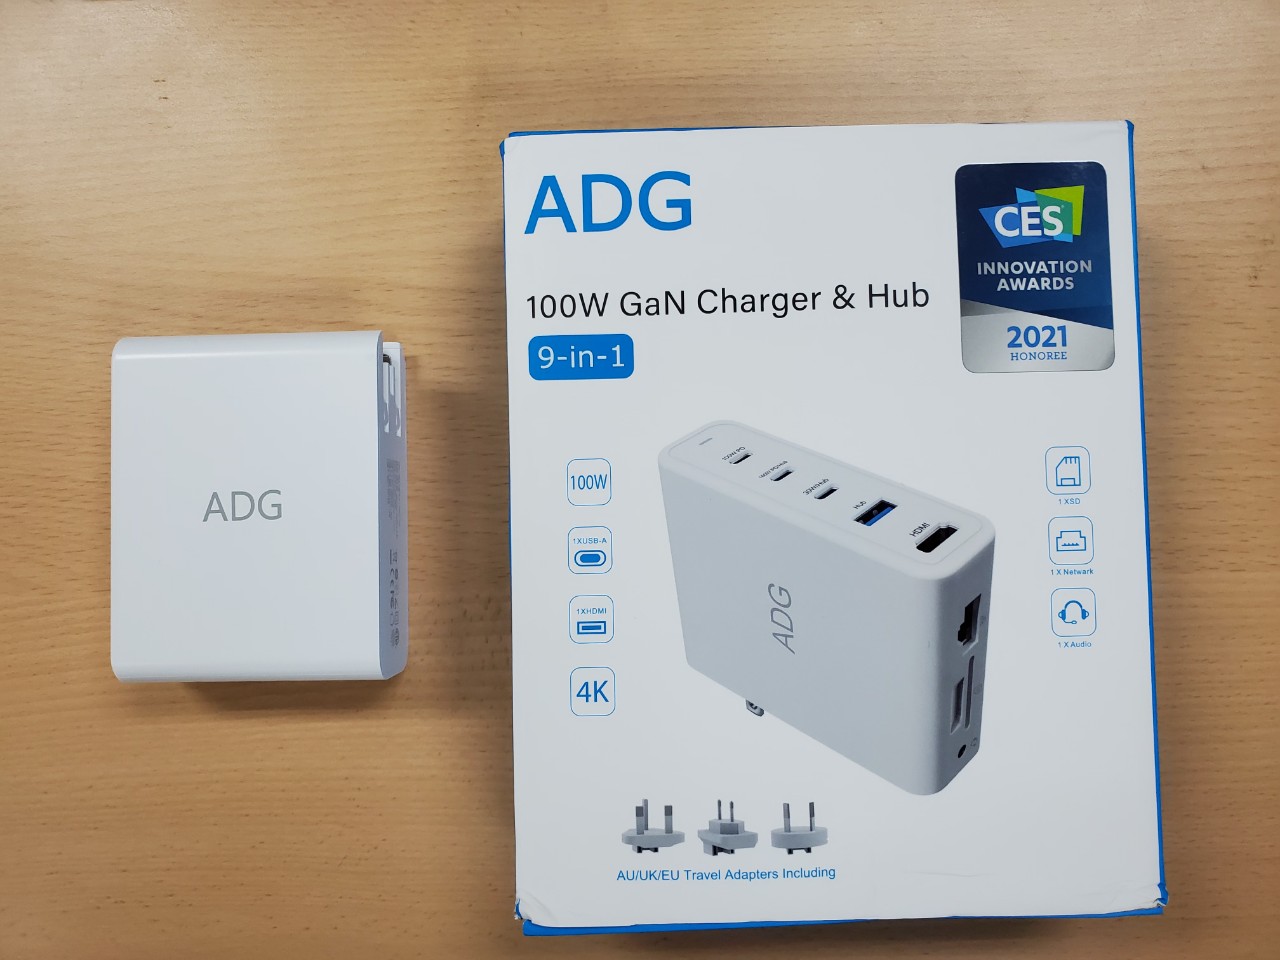 Review ADG 100W GaN Charger & Hub